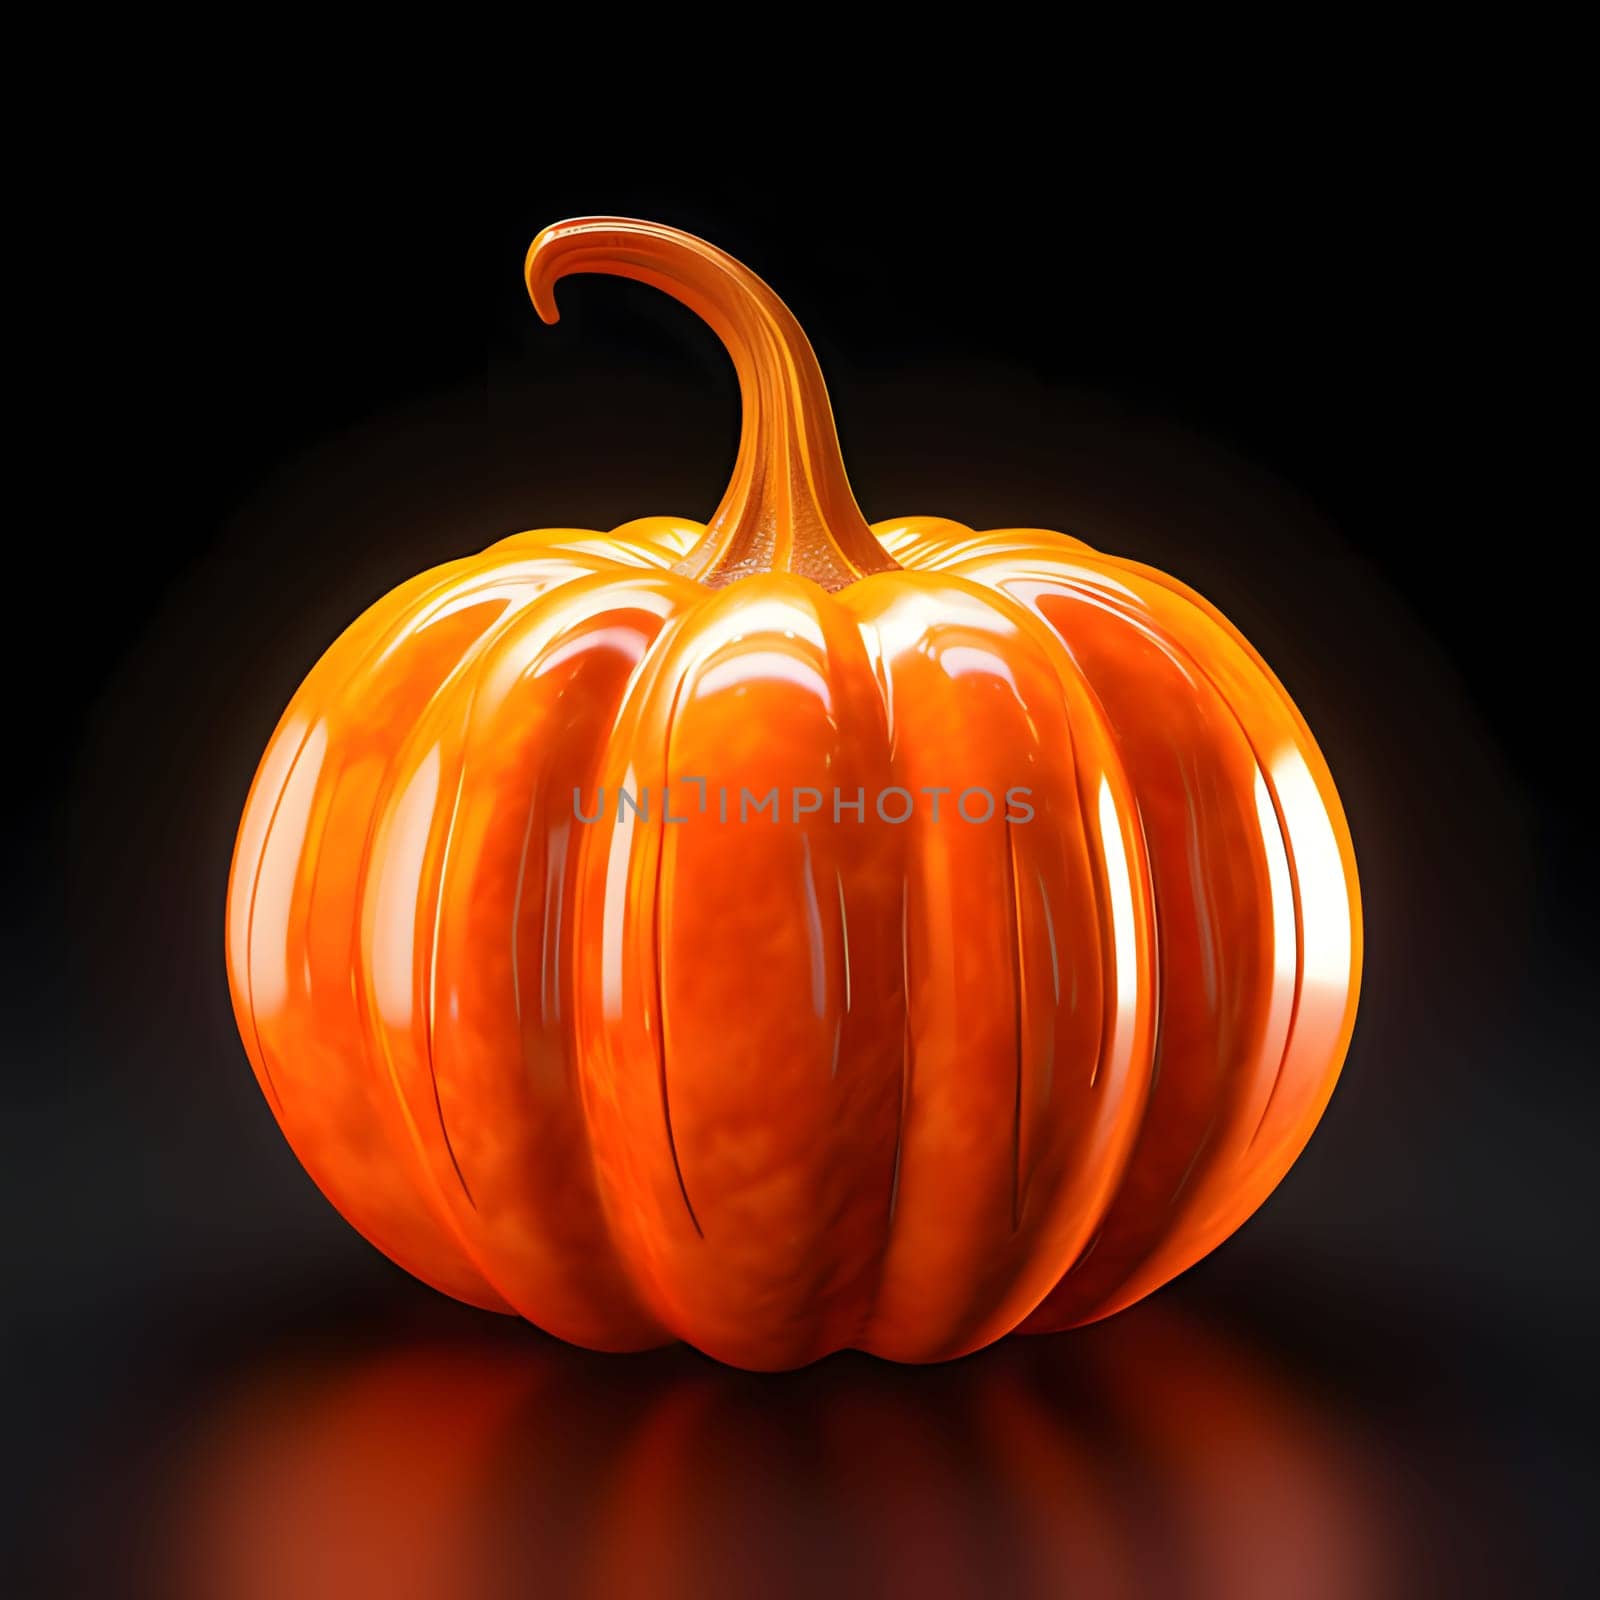 Slippery orange pumpkin on black isolated background. Pumpkin as a dish of thanksgiving for the harvest. by ThemesS